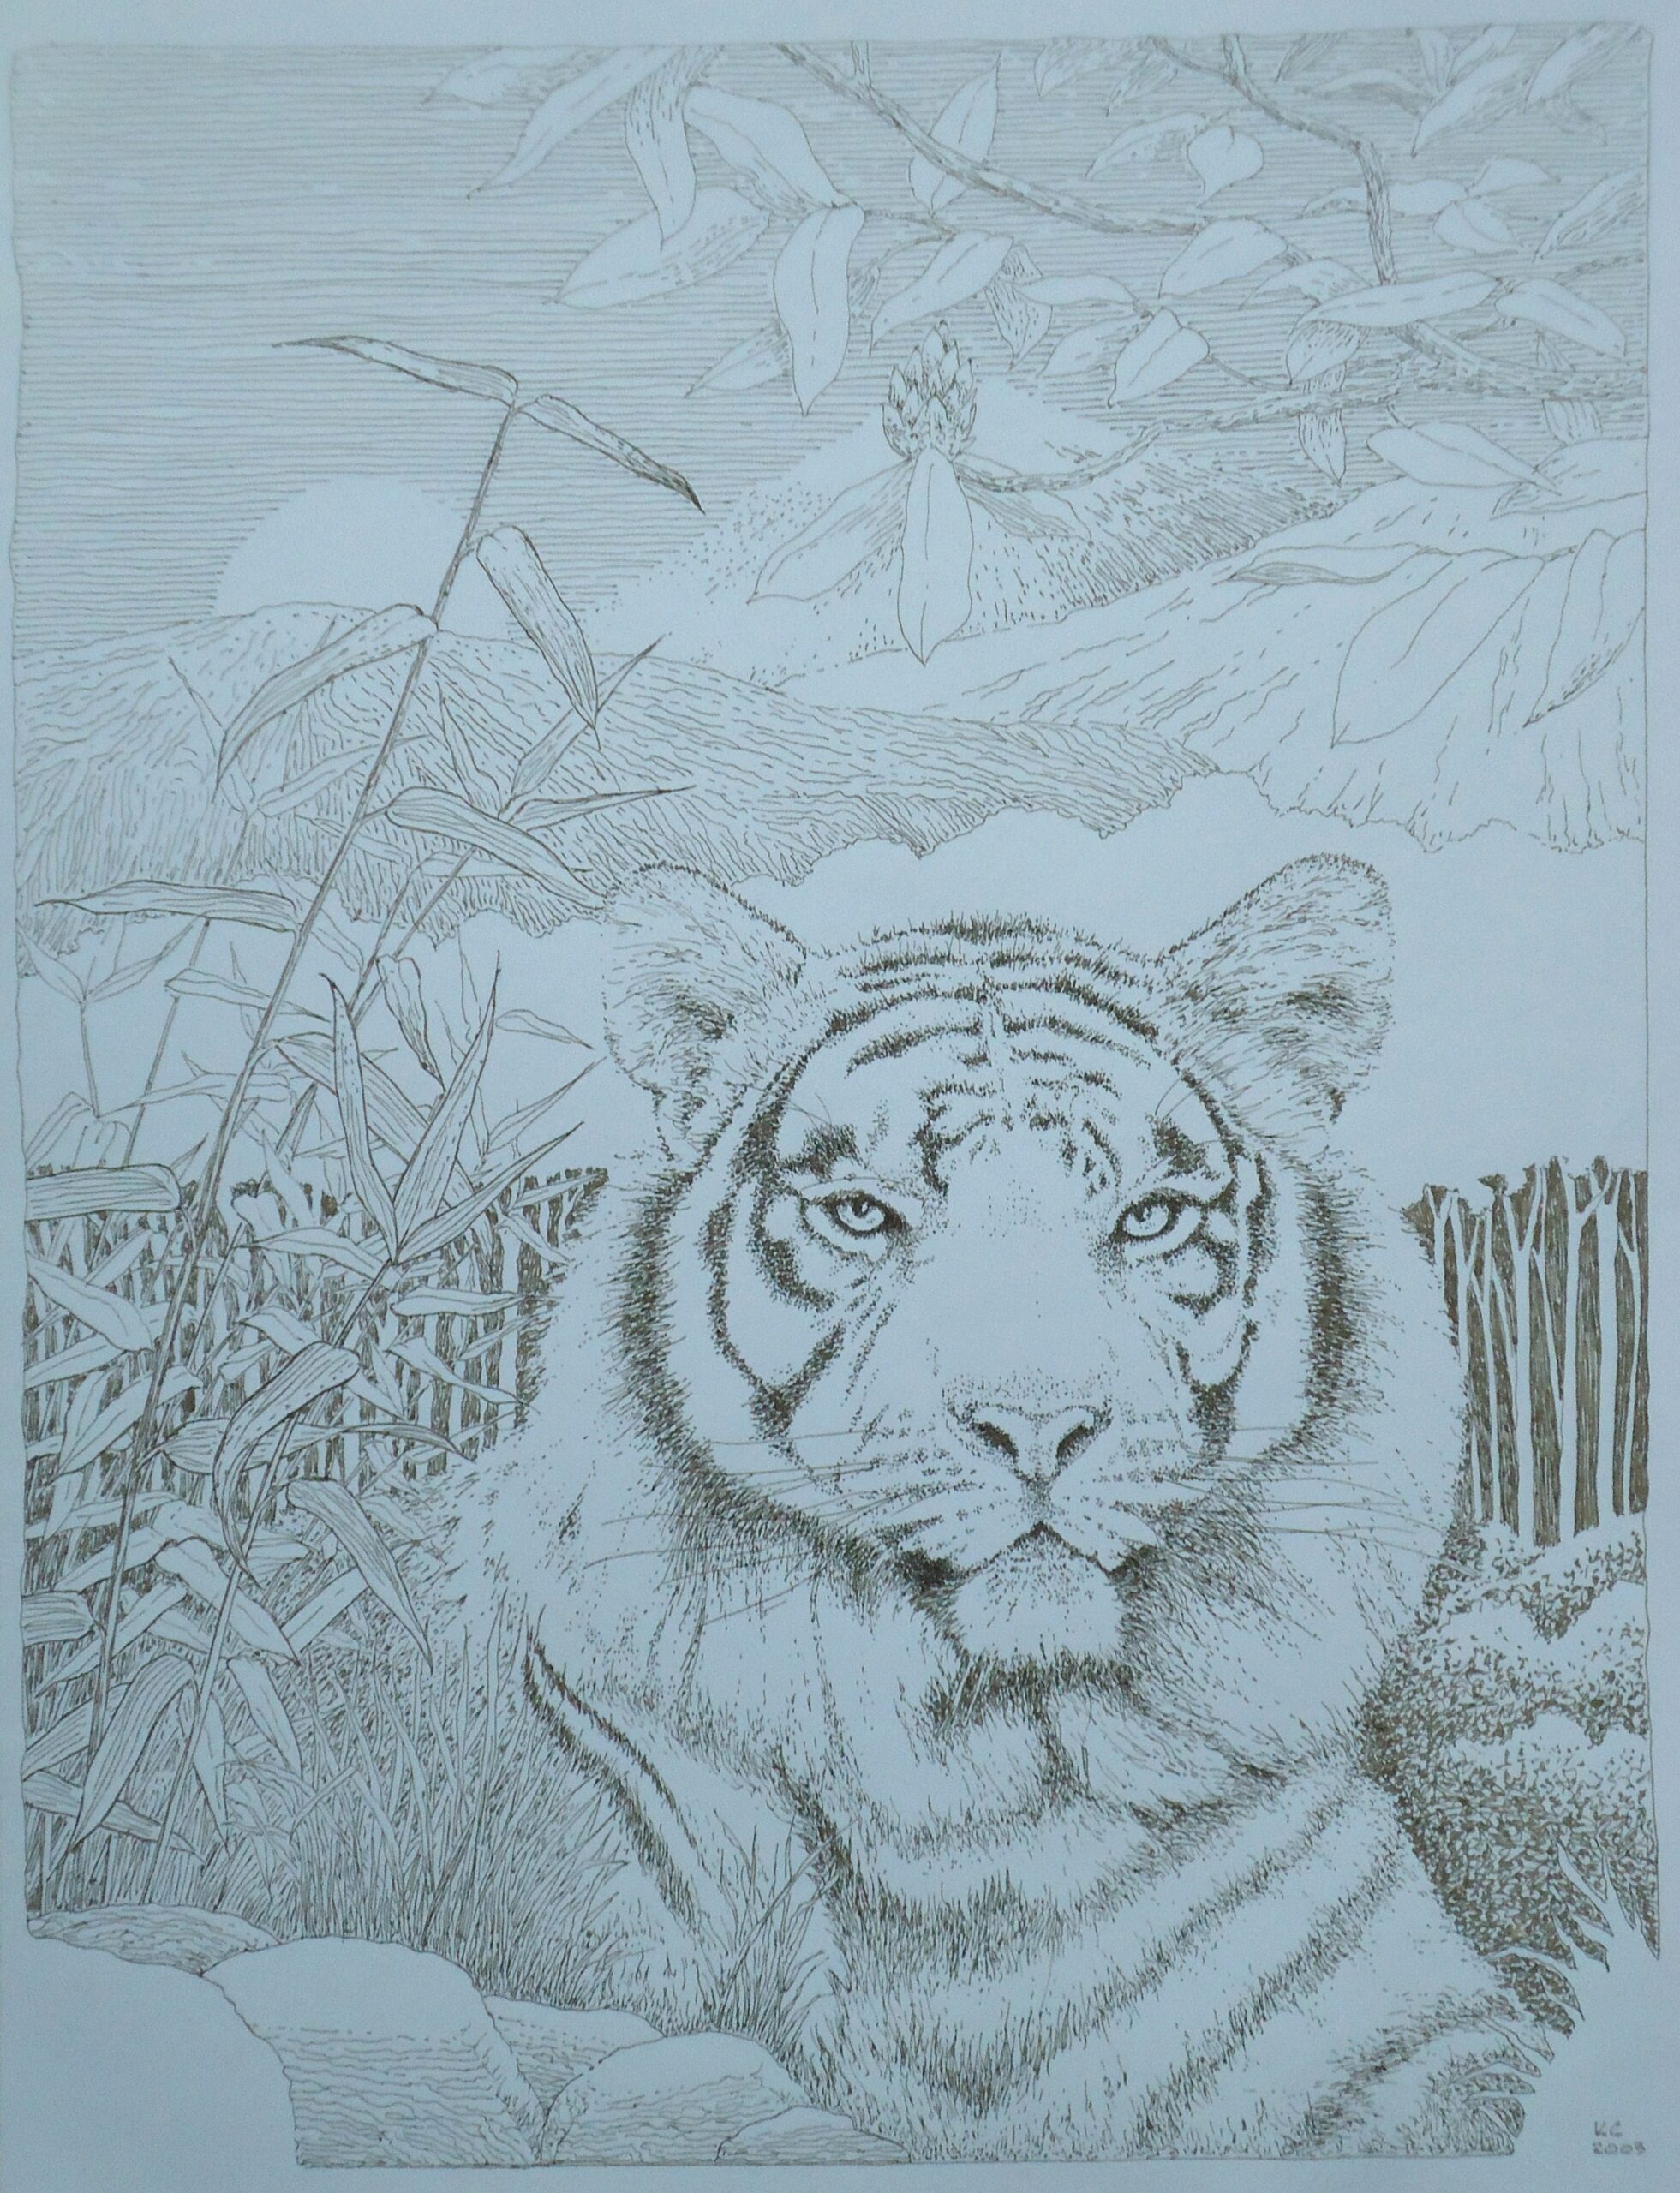 A pen and ink drawing of a tiger in a scenic setting by Keith Cains.